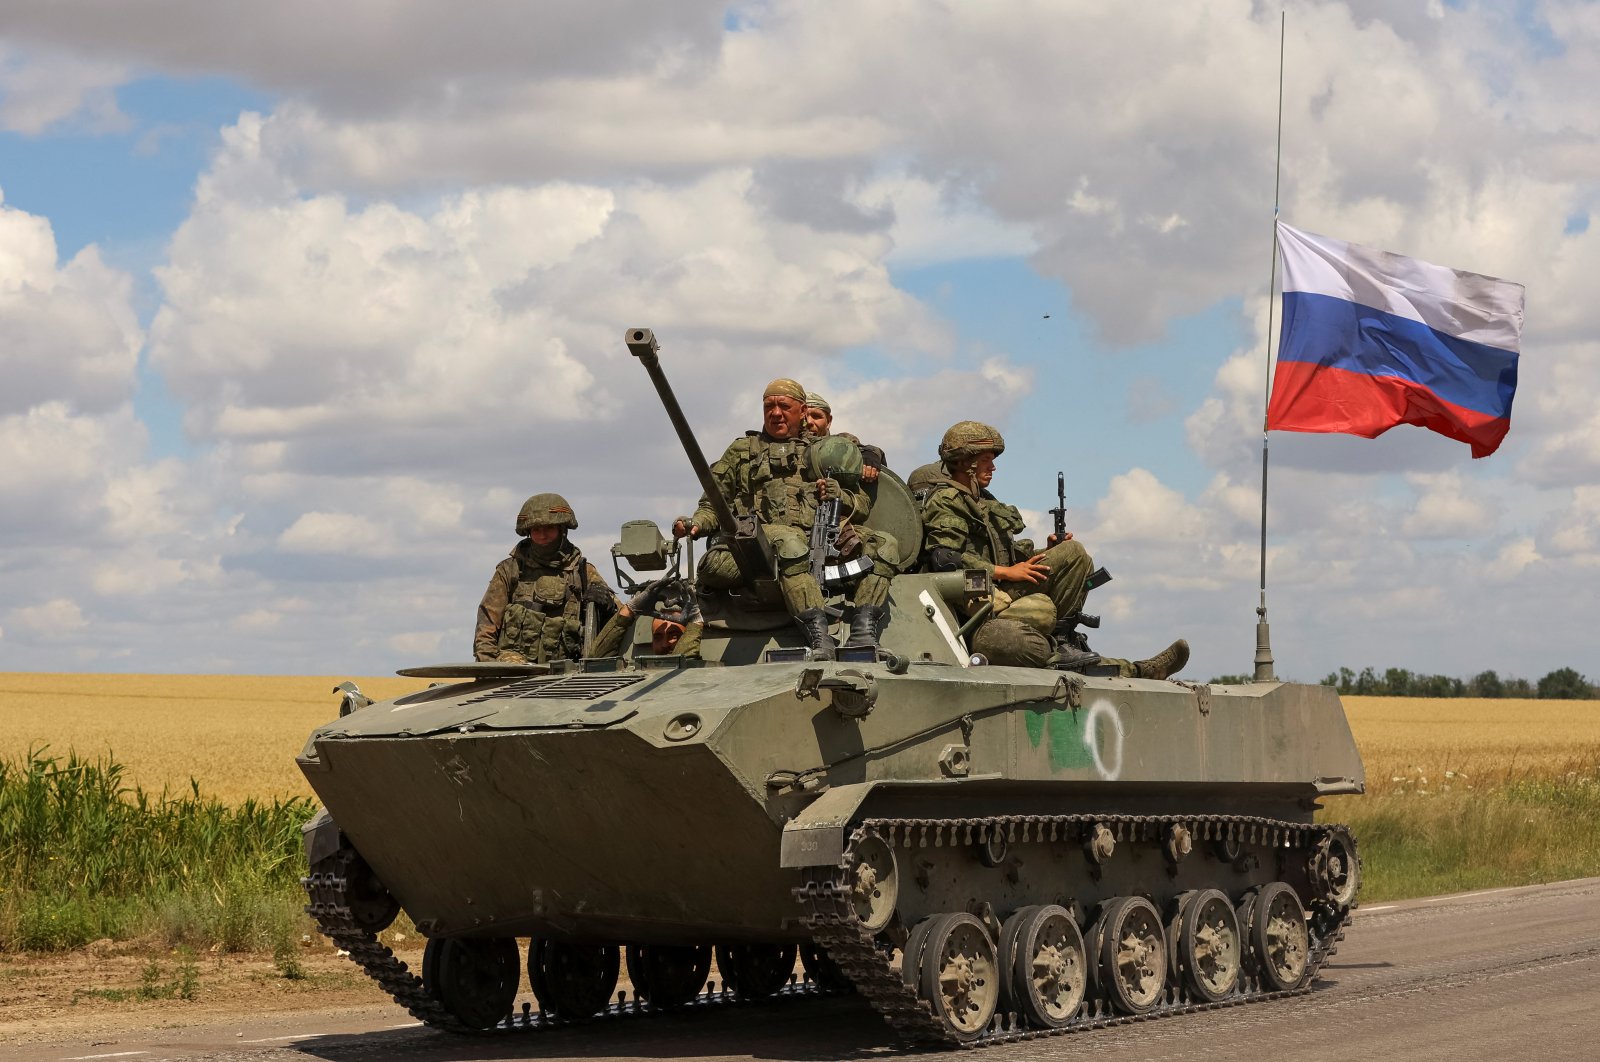 Service members of Russian troops ride on top an armored vehicle in the Russian-held part of the Zaporizhzhia region, Ukraine, July 23, 2022. (Reuters Photo)